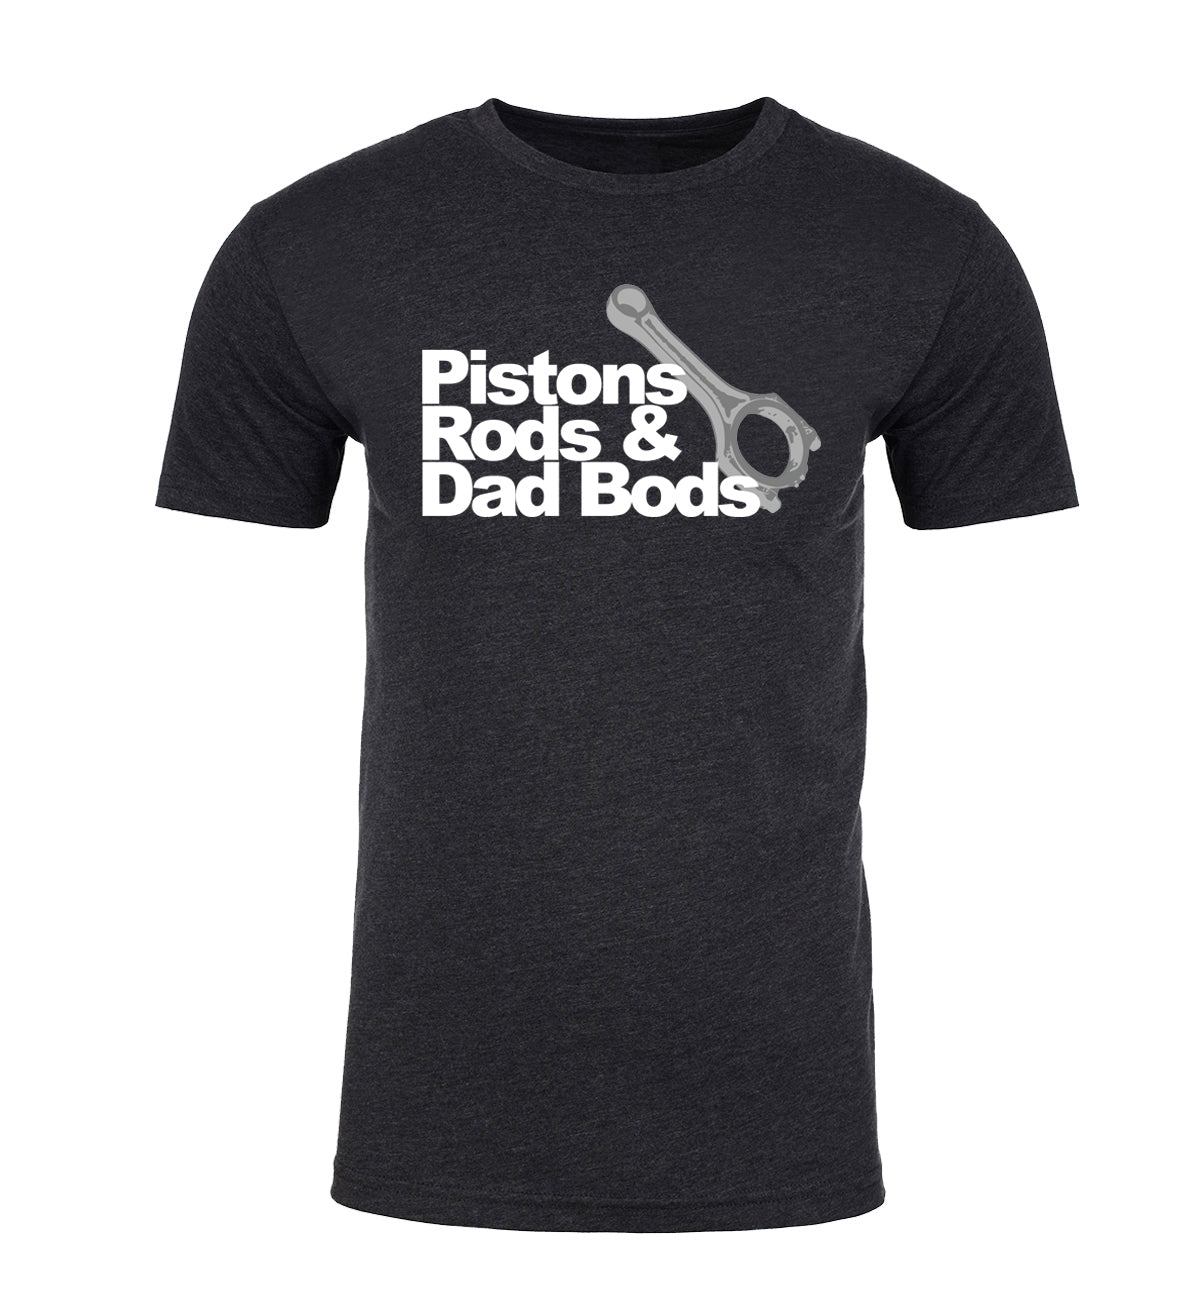 Pistons, Rods & Dad Bods - Simple Image Unisex T Shirts - Mato & Hash